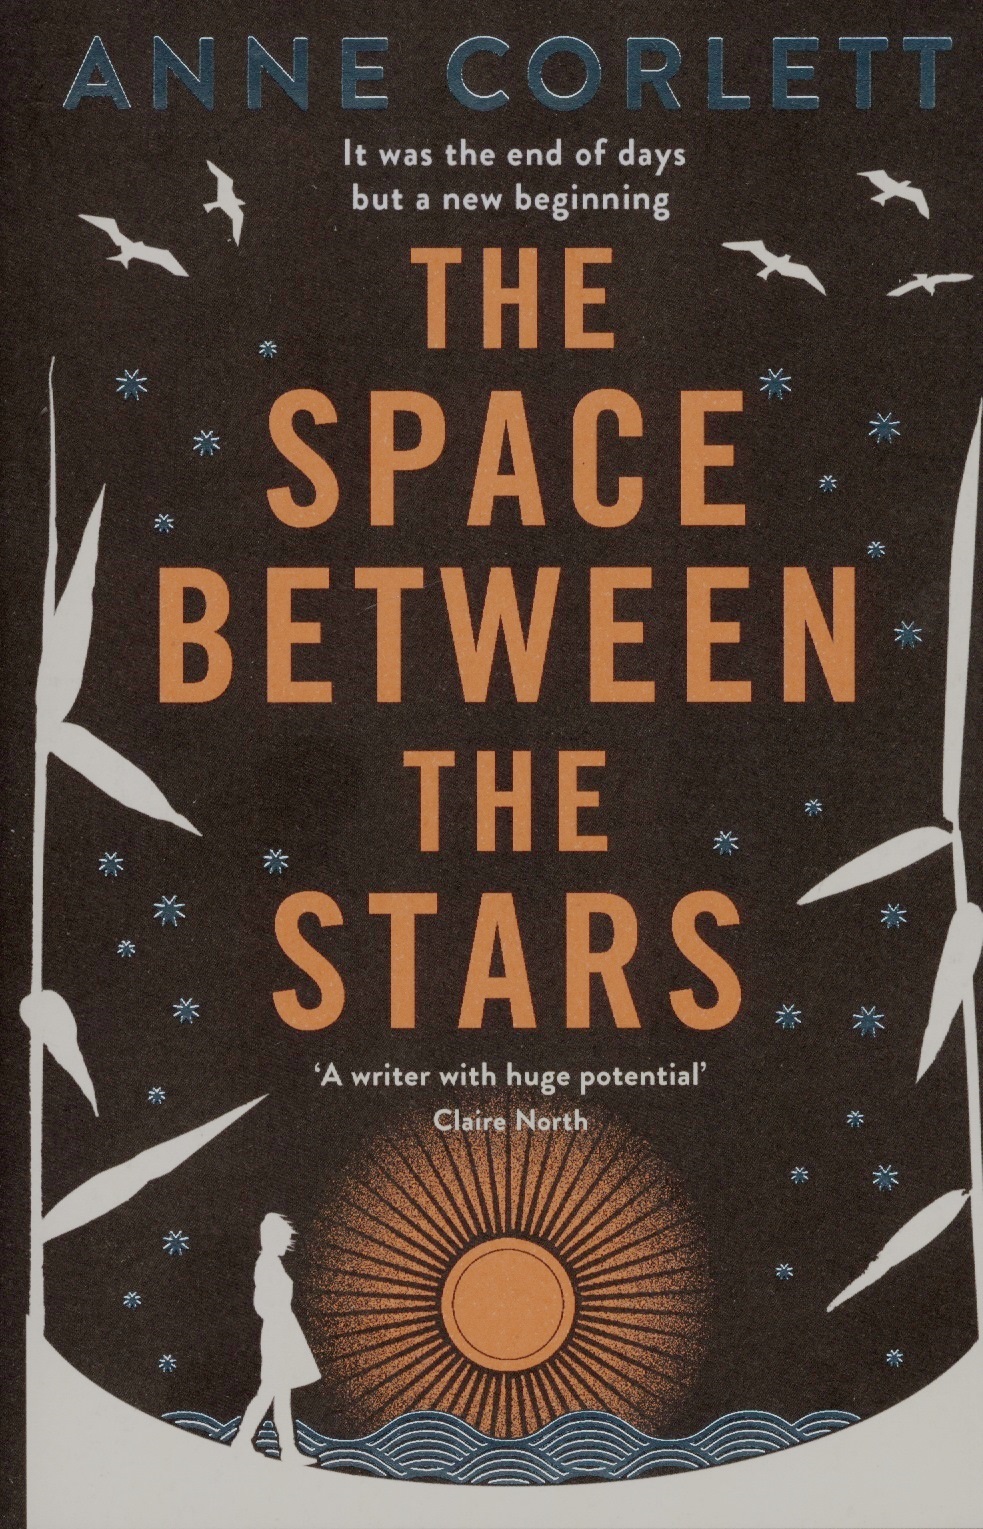 rees gwyneth earth to daniel The Space Between the Stars